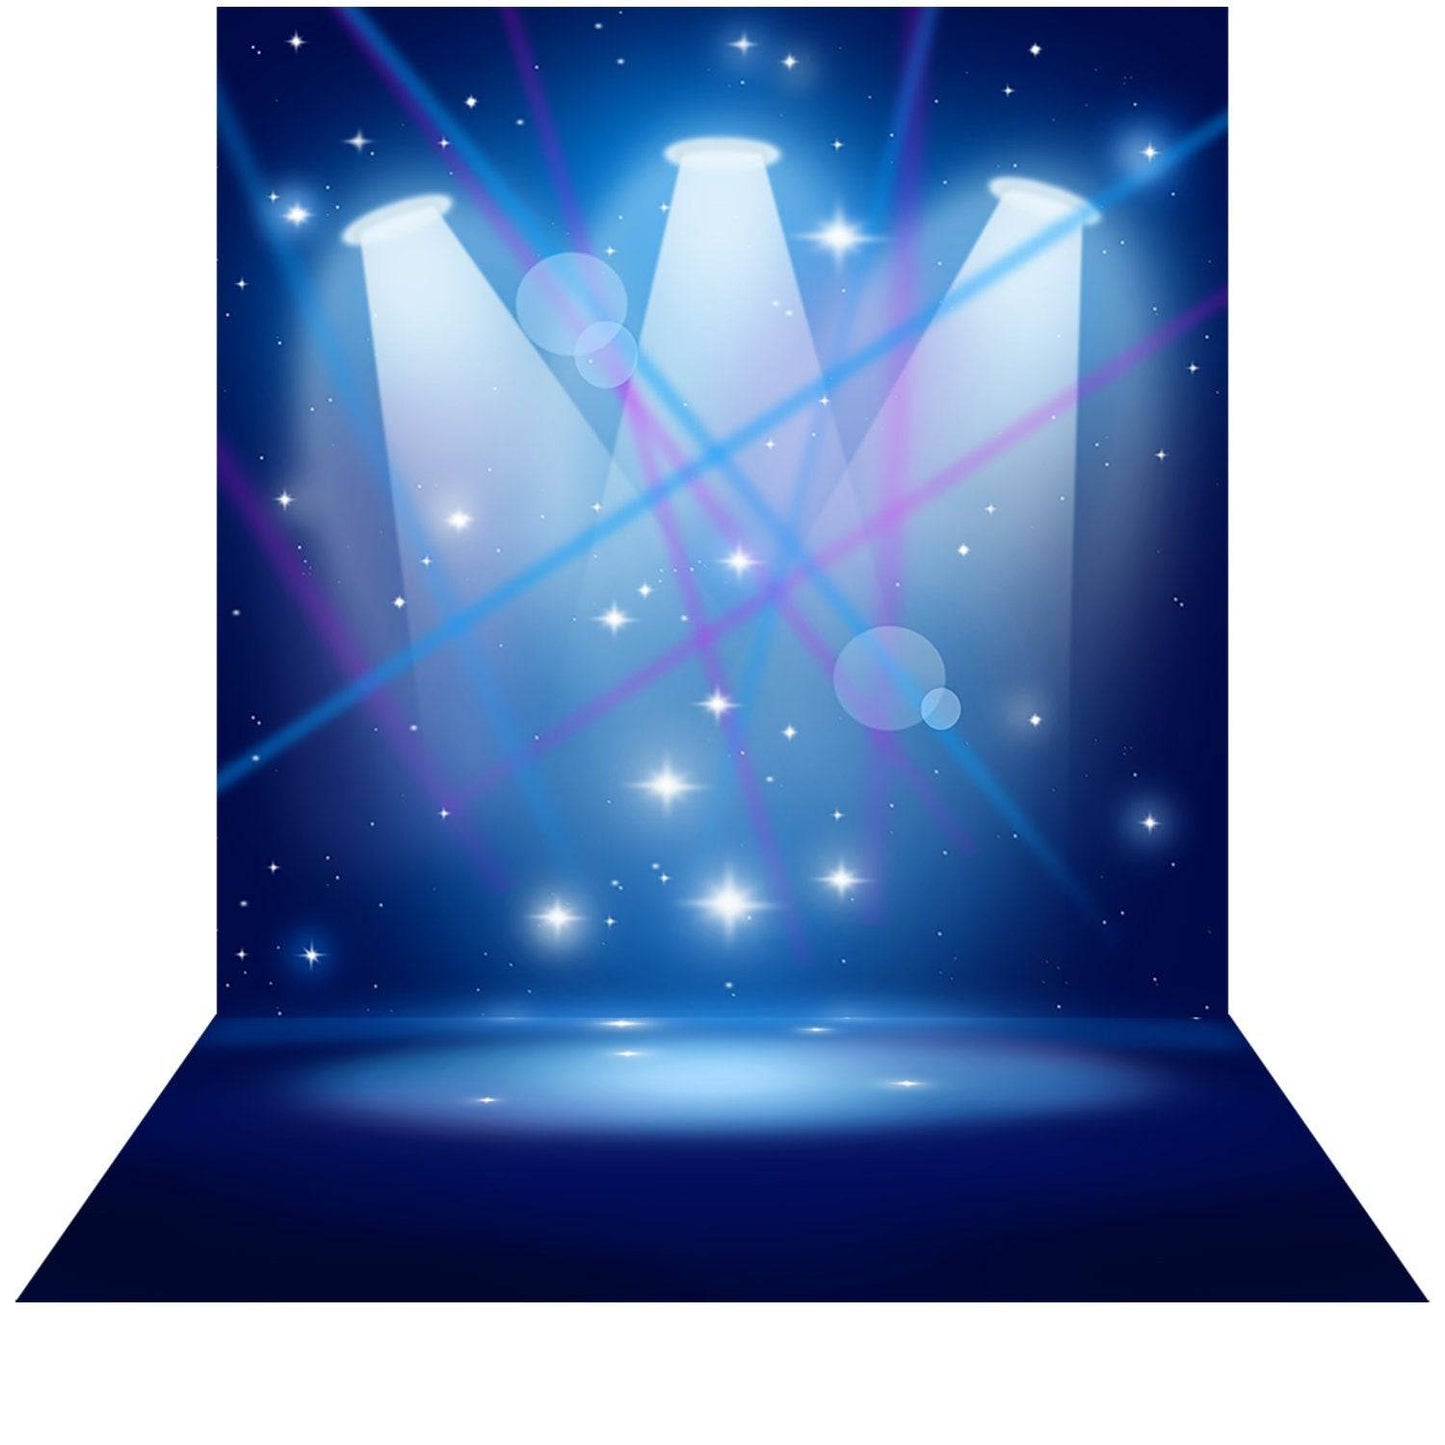 Stage Backdrop, Musical, Play, Competition, School, Recital, Children's Backdrop, Photo Backdrop, Photo Booth - Pro 9 x 16